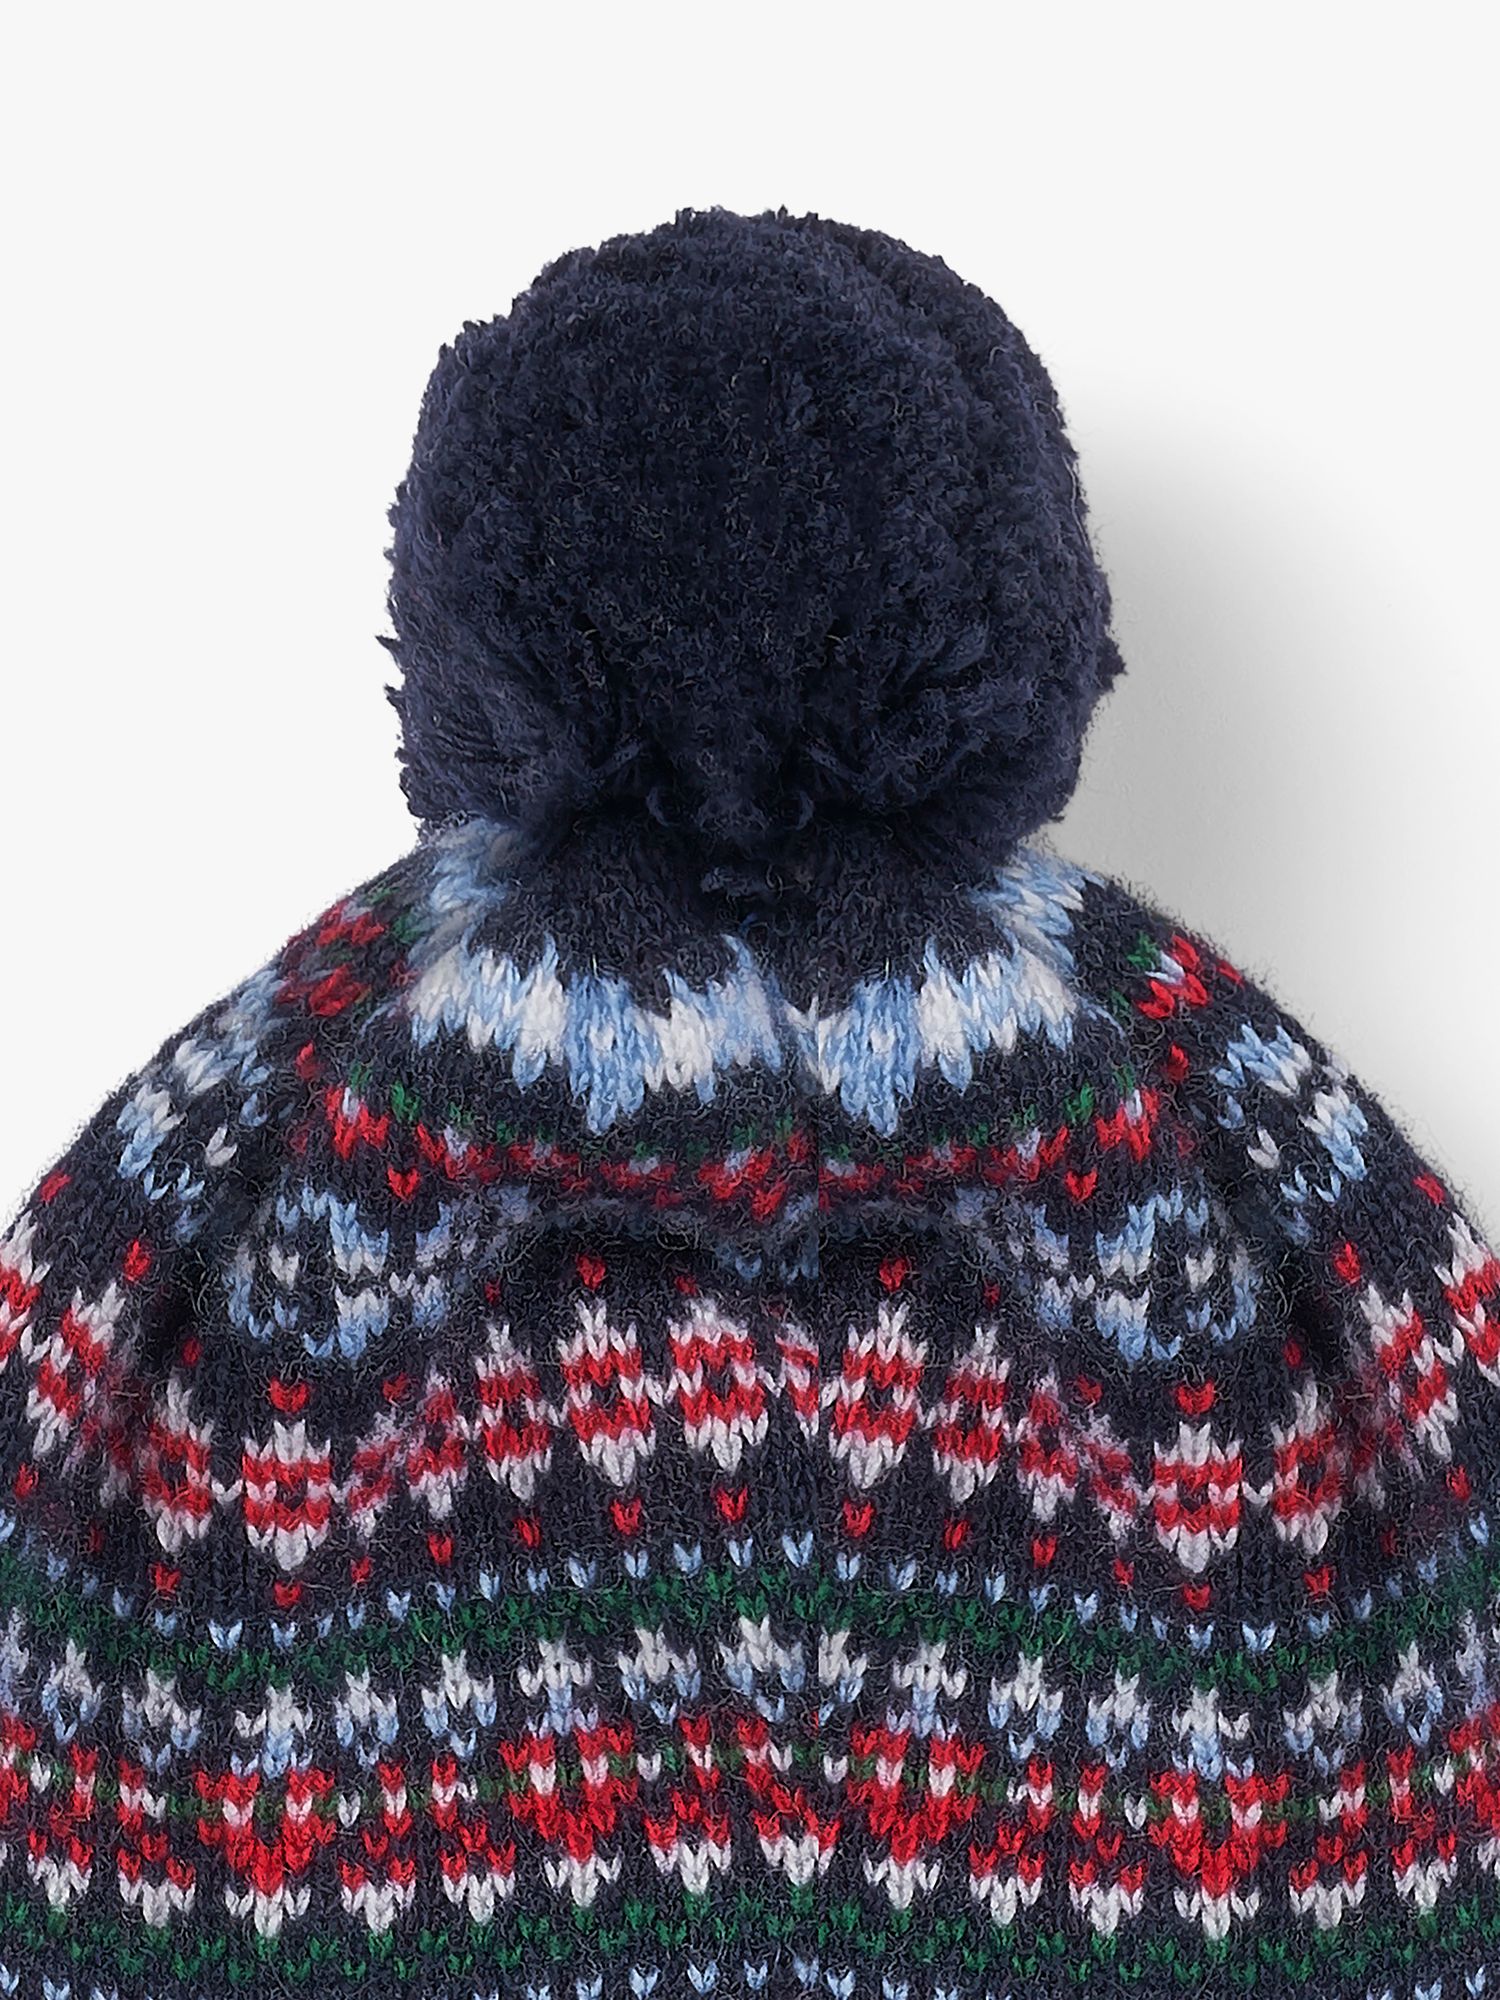 Buy Trotters Kids' Fair Isle Wool and Cashmere Blend Bobble Hat Online at johnlewis.com